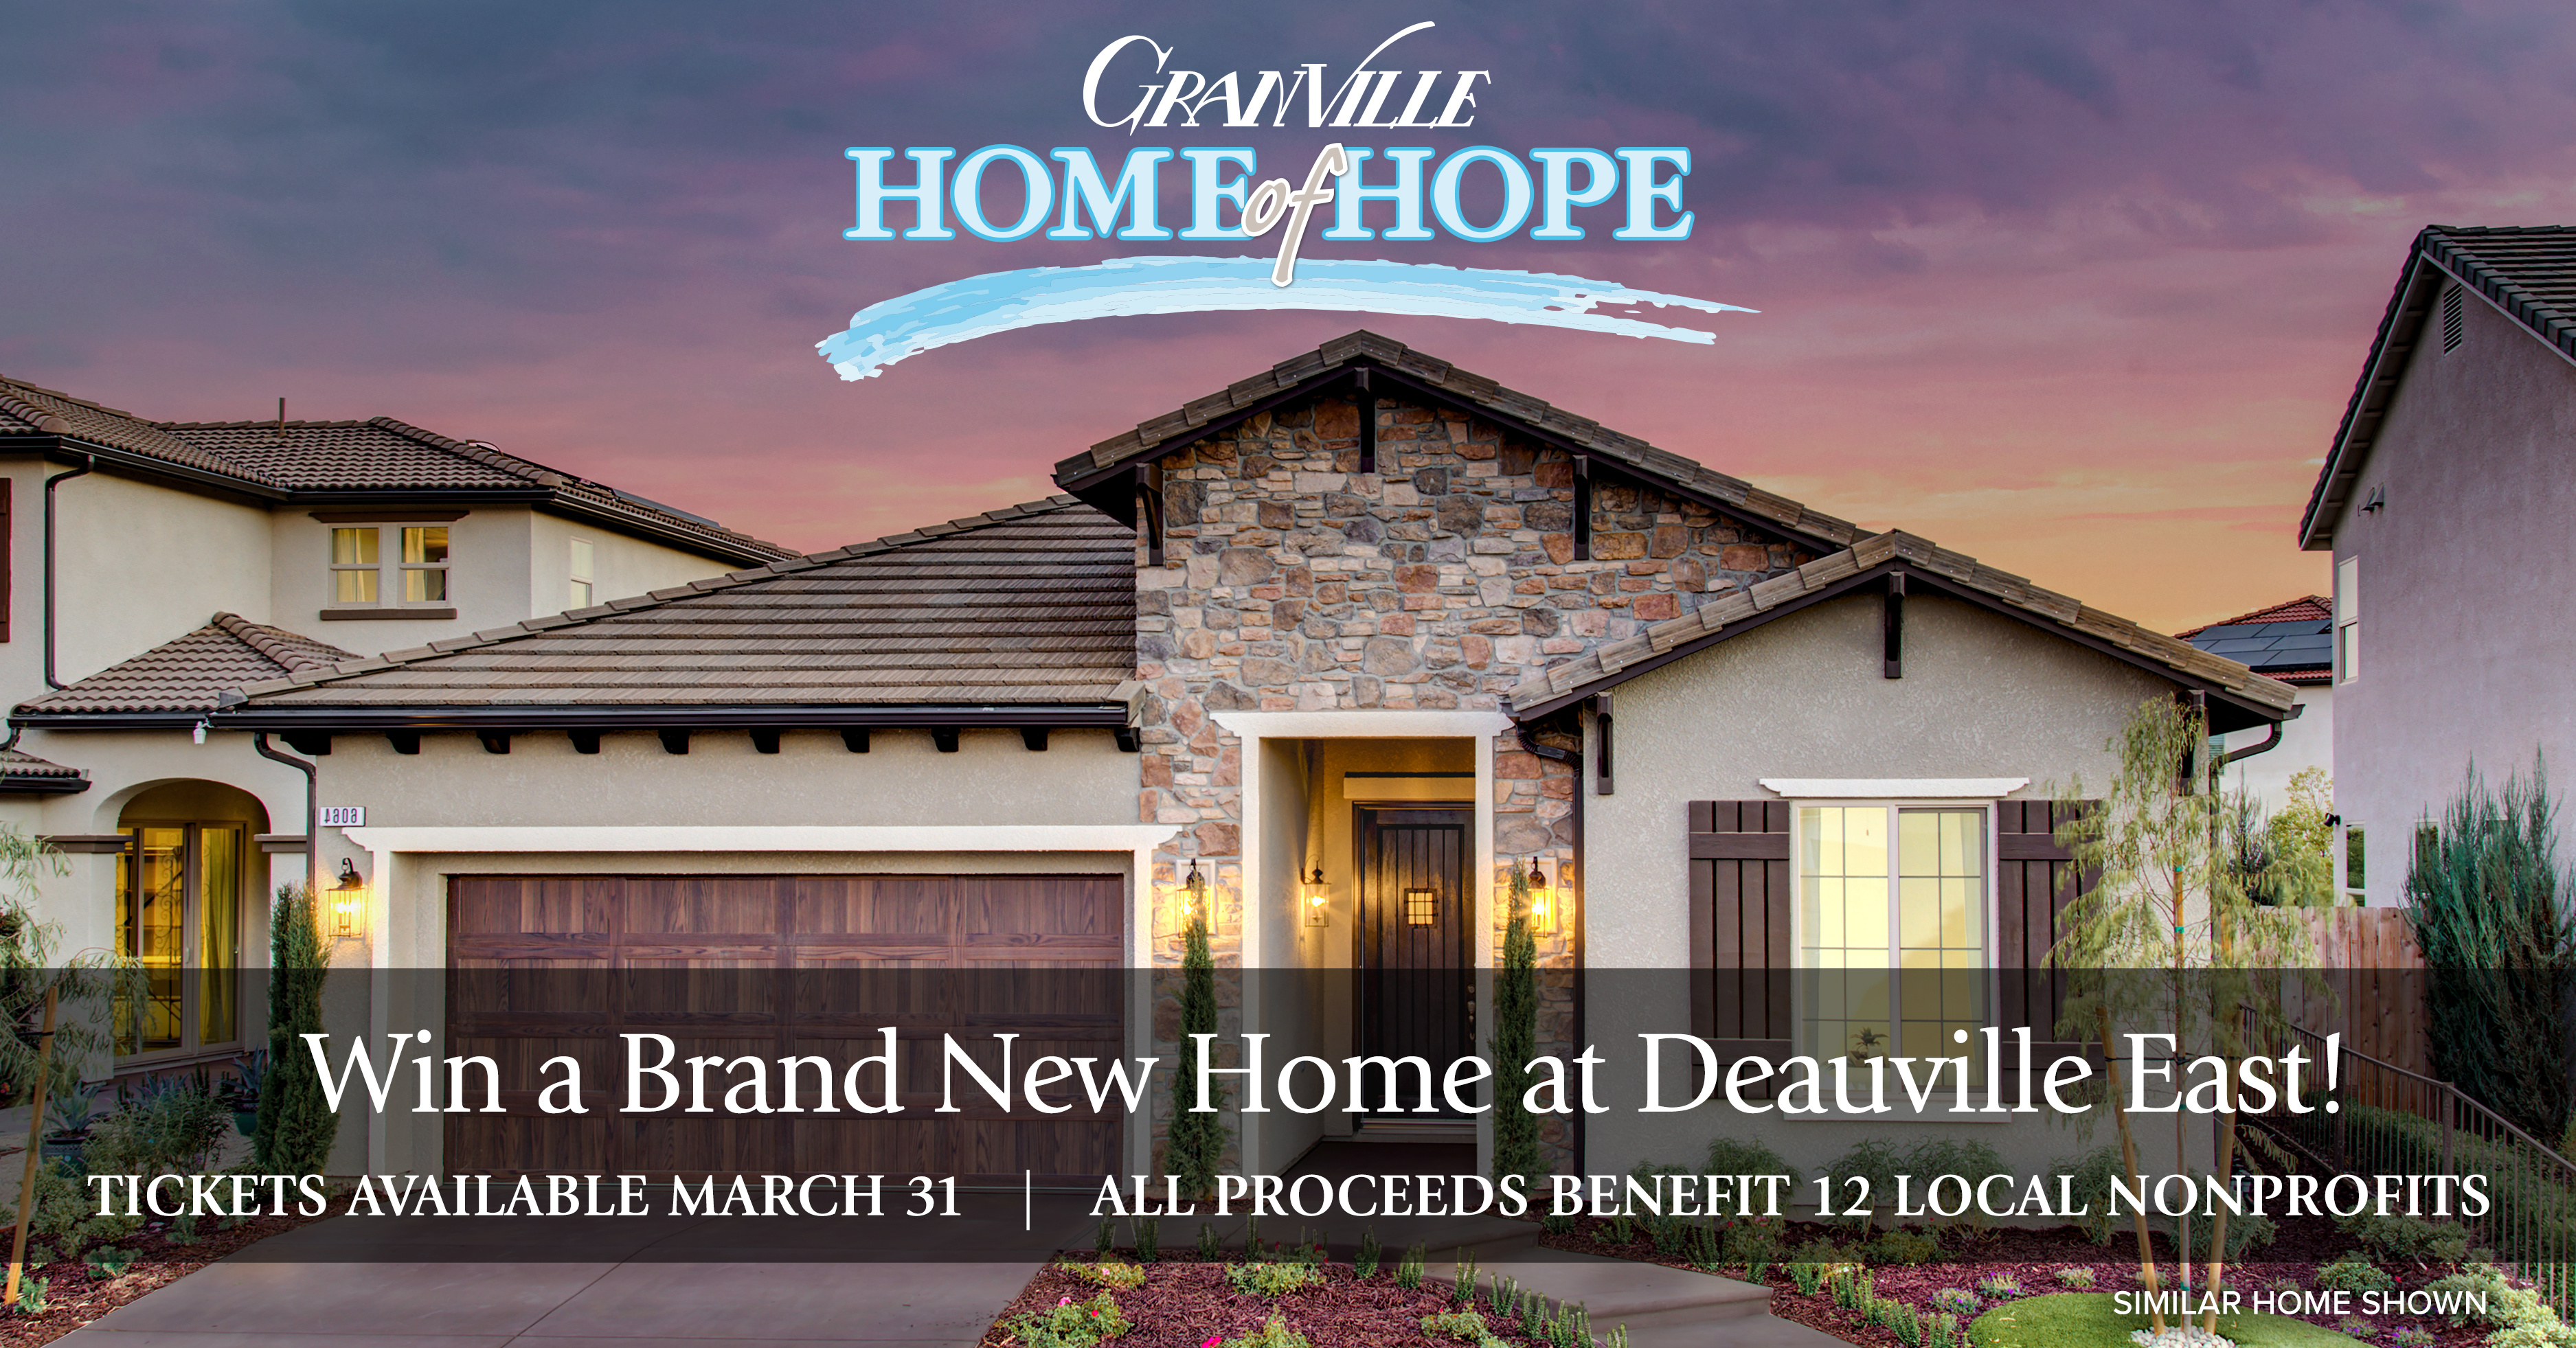 granville home of hope - win a brand new home at deauville east! tickets available march 31. all proceeds benefit 12 local nonprofits